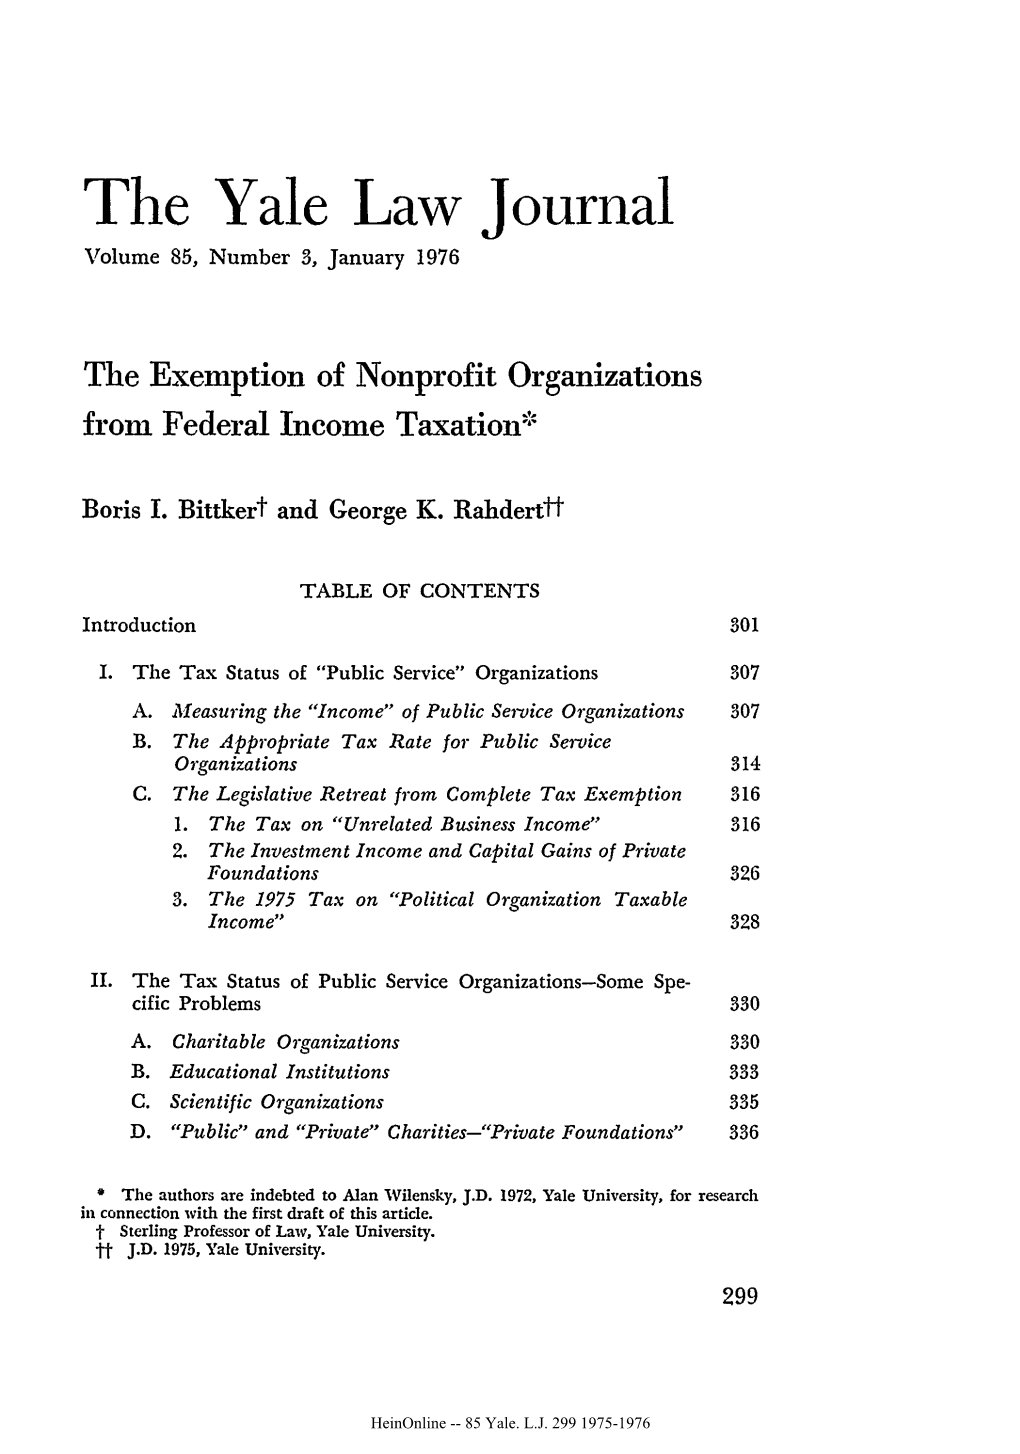 The Exemption of Nonprofit Organizations from Federal Income Taxation'